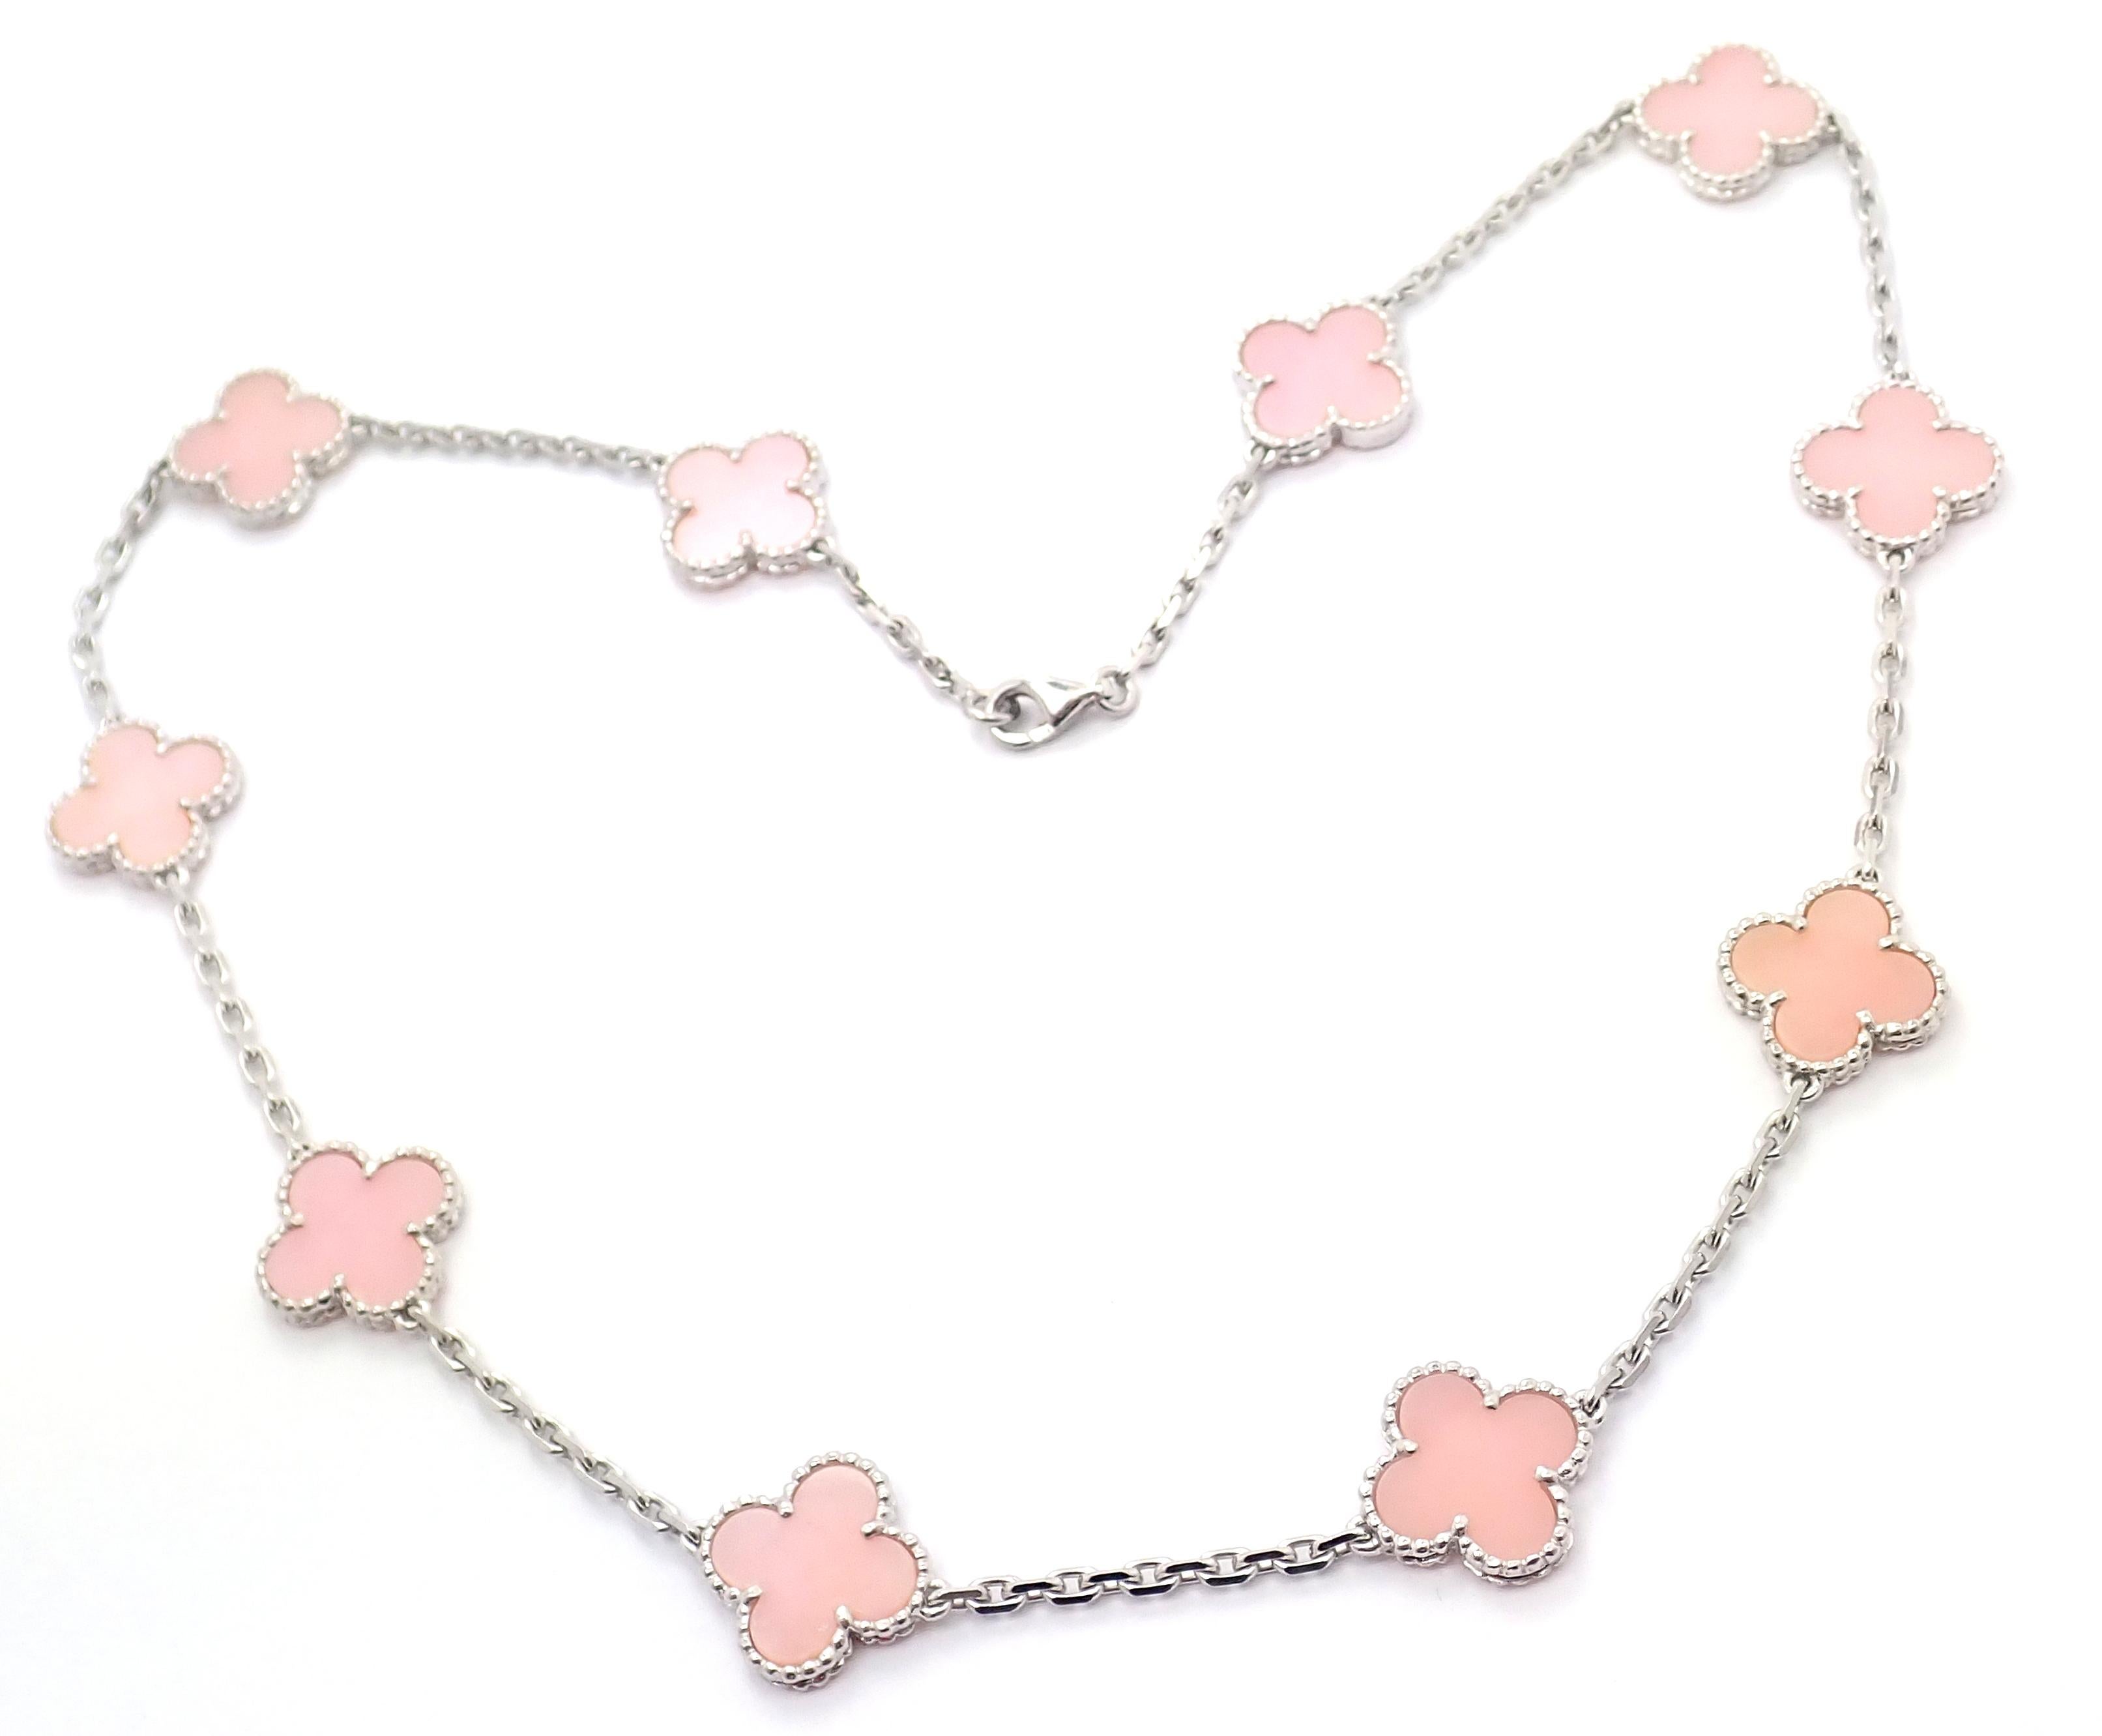 18k White Gold 10-Motif Pink Opal Vintage Alhambra Necklace by Van Cleef & Arples. 
With 10 pink opal alhambra stones 15mm each
This necklace comes with a VCA box and a service paper from a VCA store.
Details: 
Weight: 23.6 grams
Length: